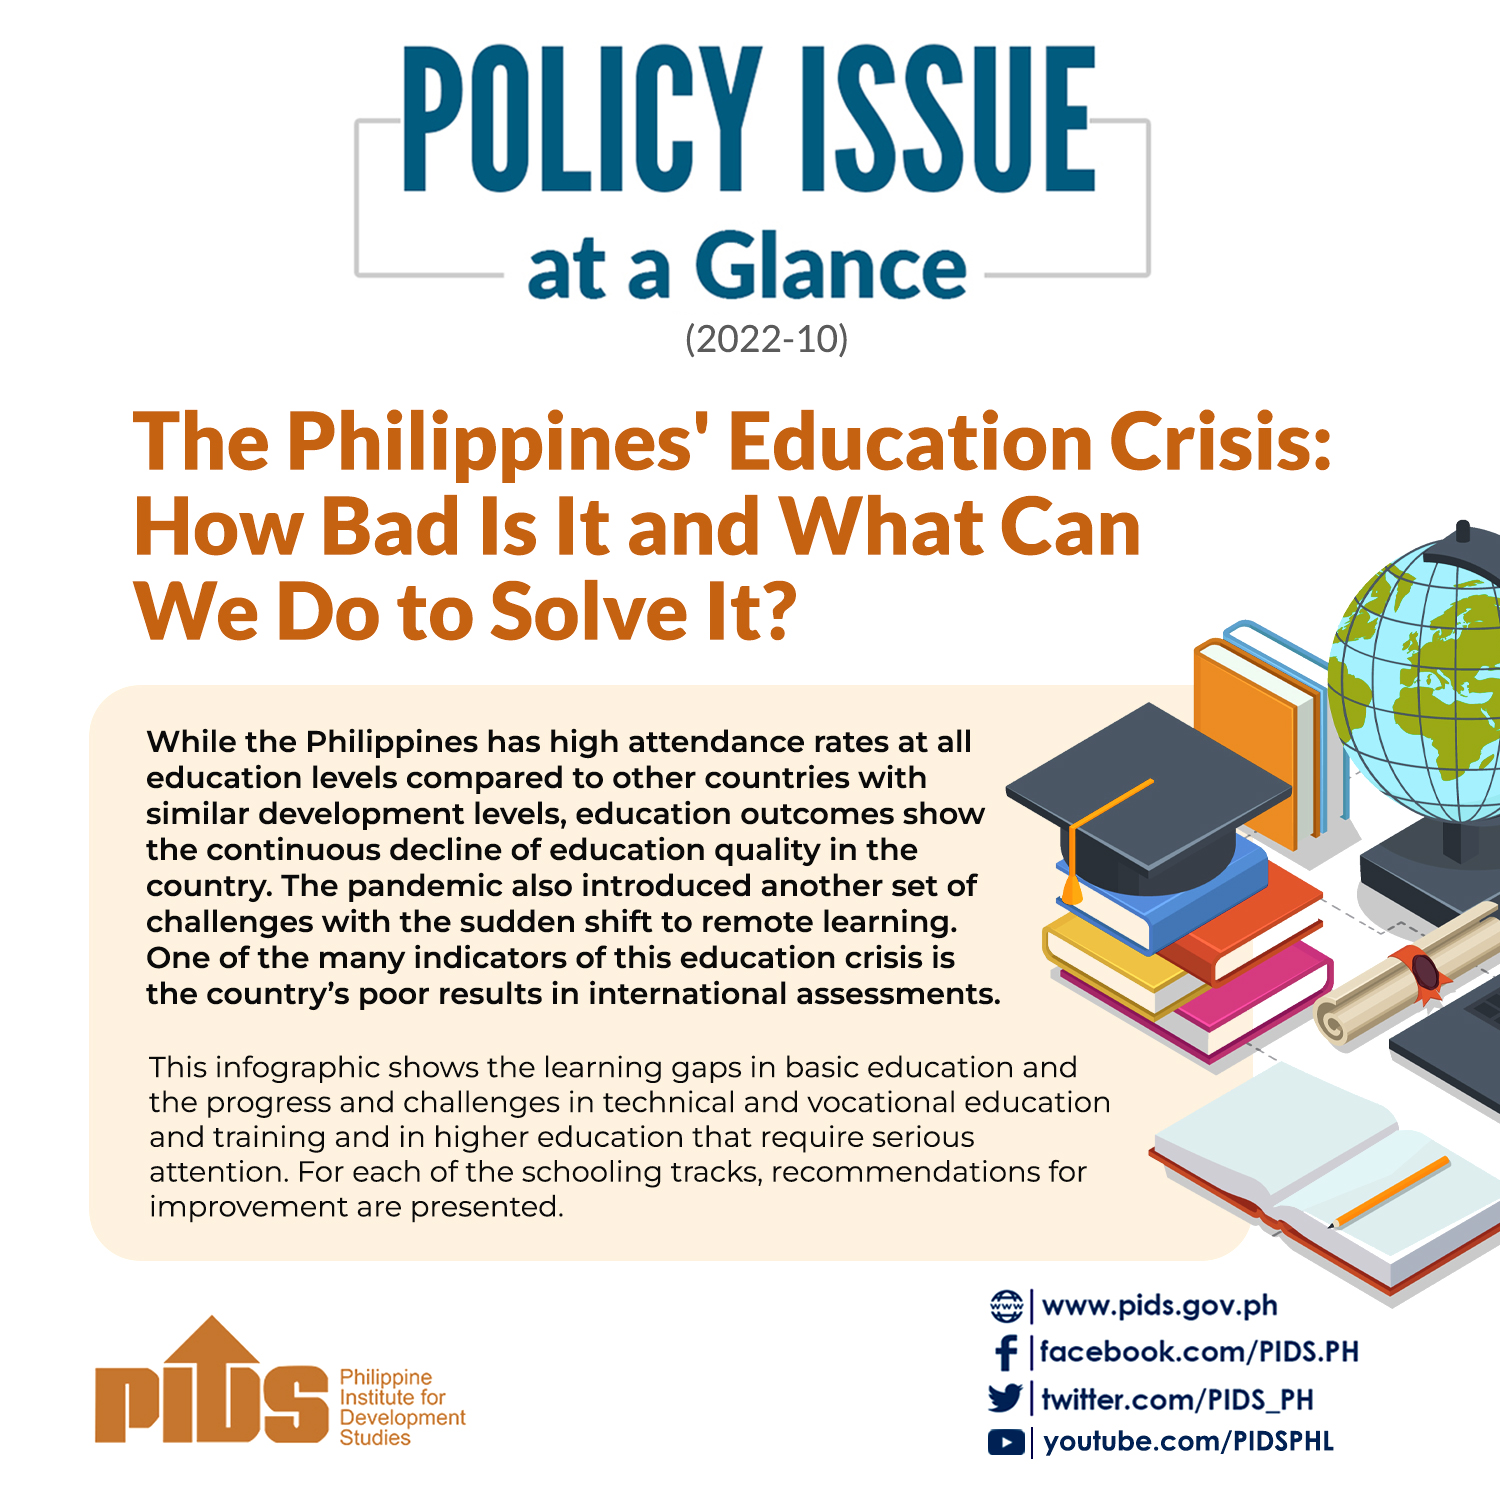 The Philippines’ Education Crisis: How Bad Is It and What Can We Do to Solve It?-01.jpg